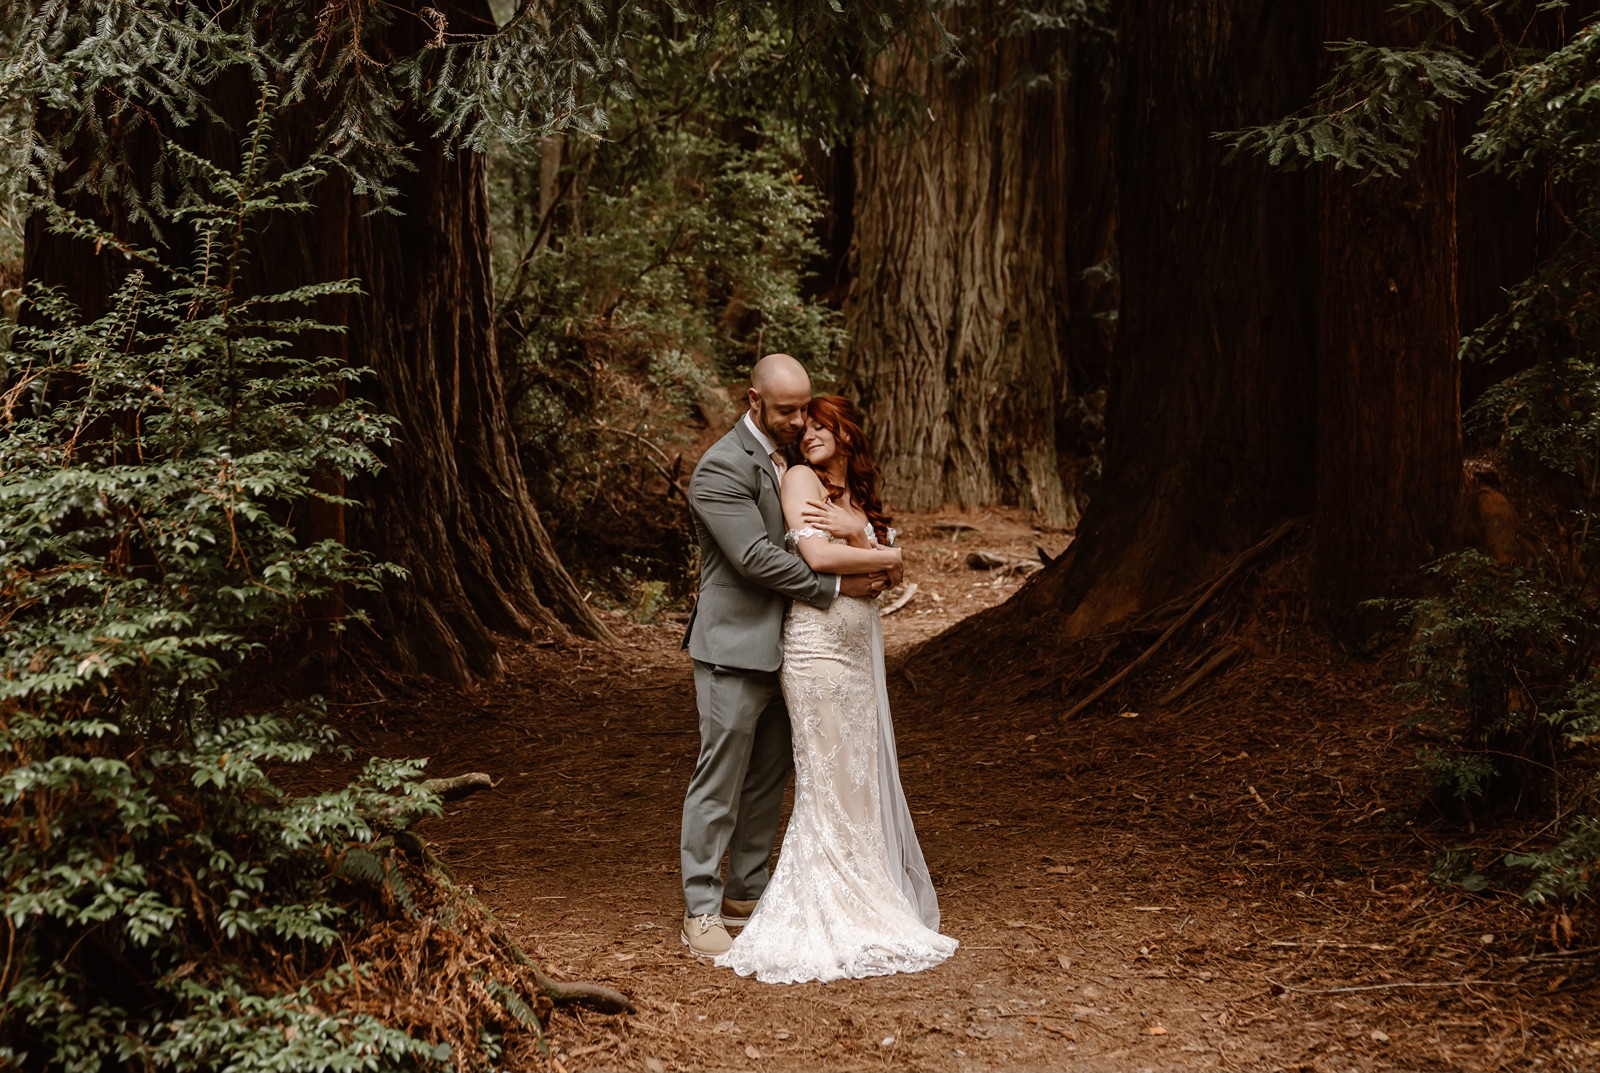 Man wraps arms around woman during elopement in Fern Canyon